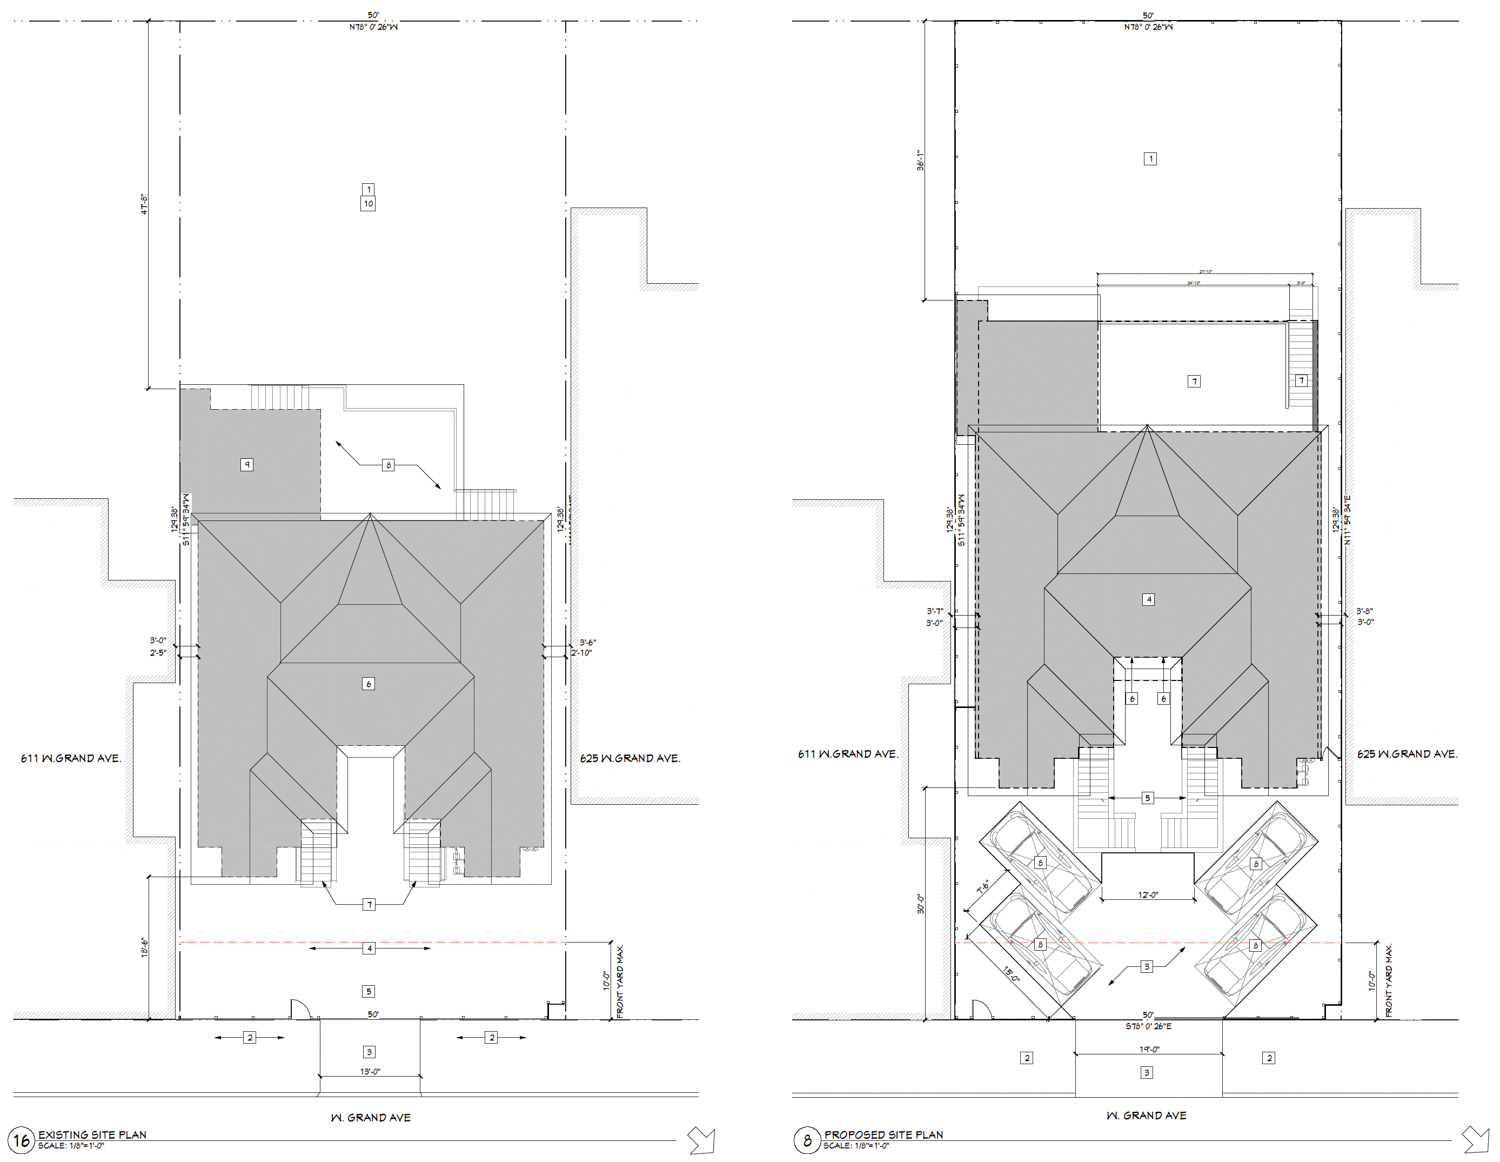 The multi-family dwevelopment site plan at 619-621 West Grand Avenue, drawing by the Architect Office